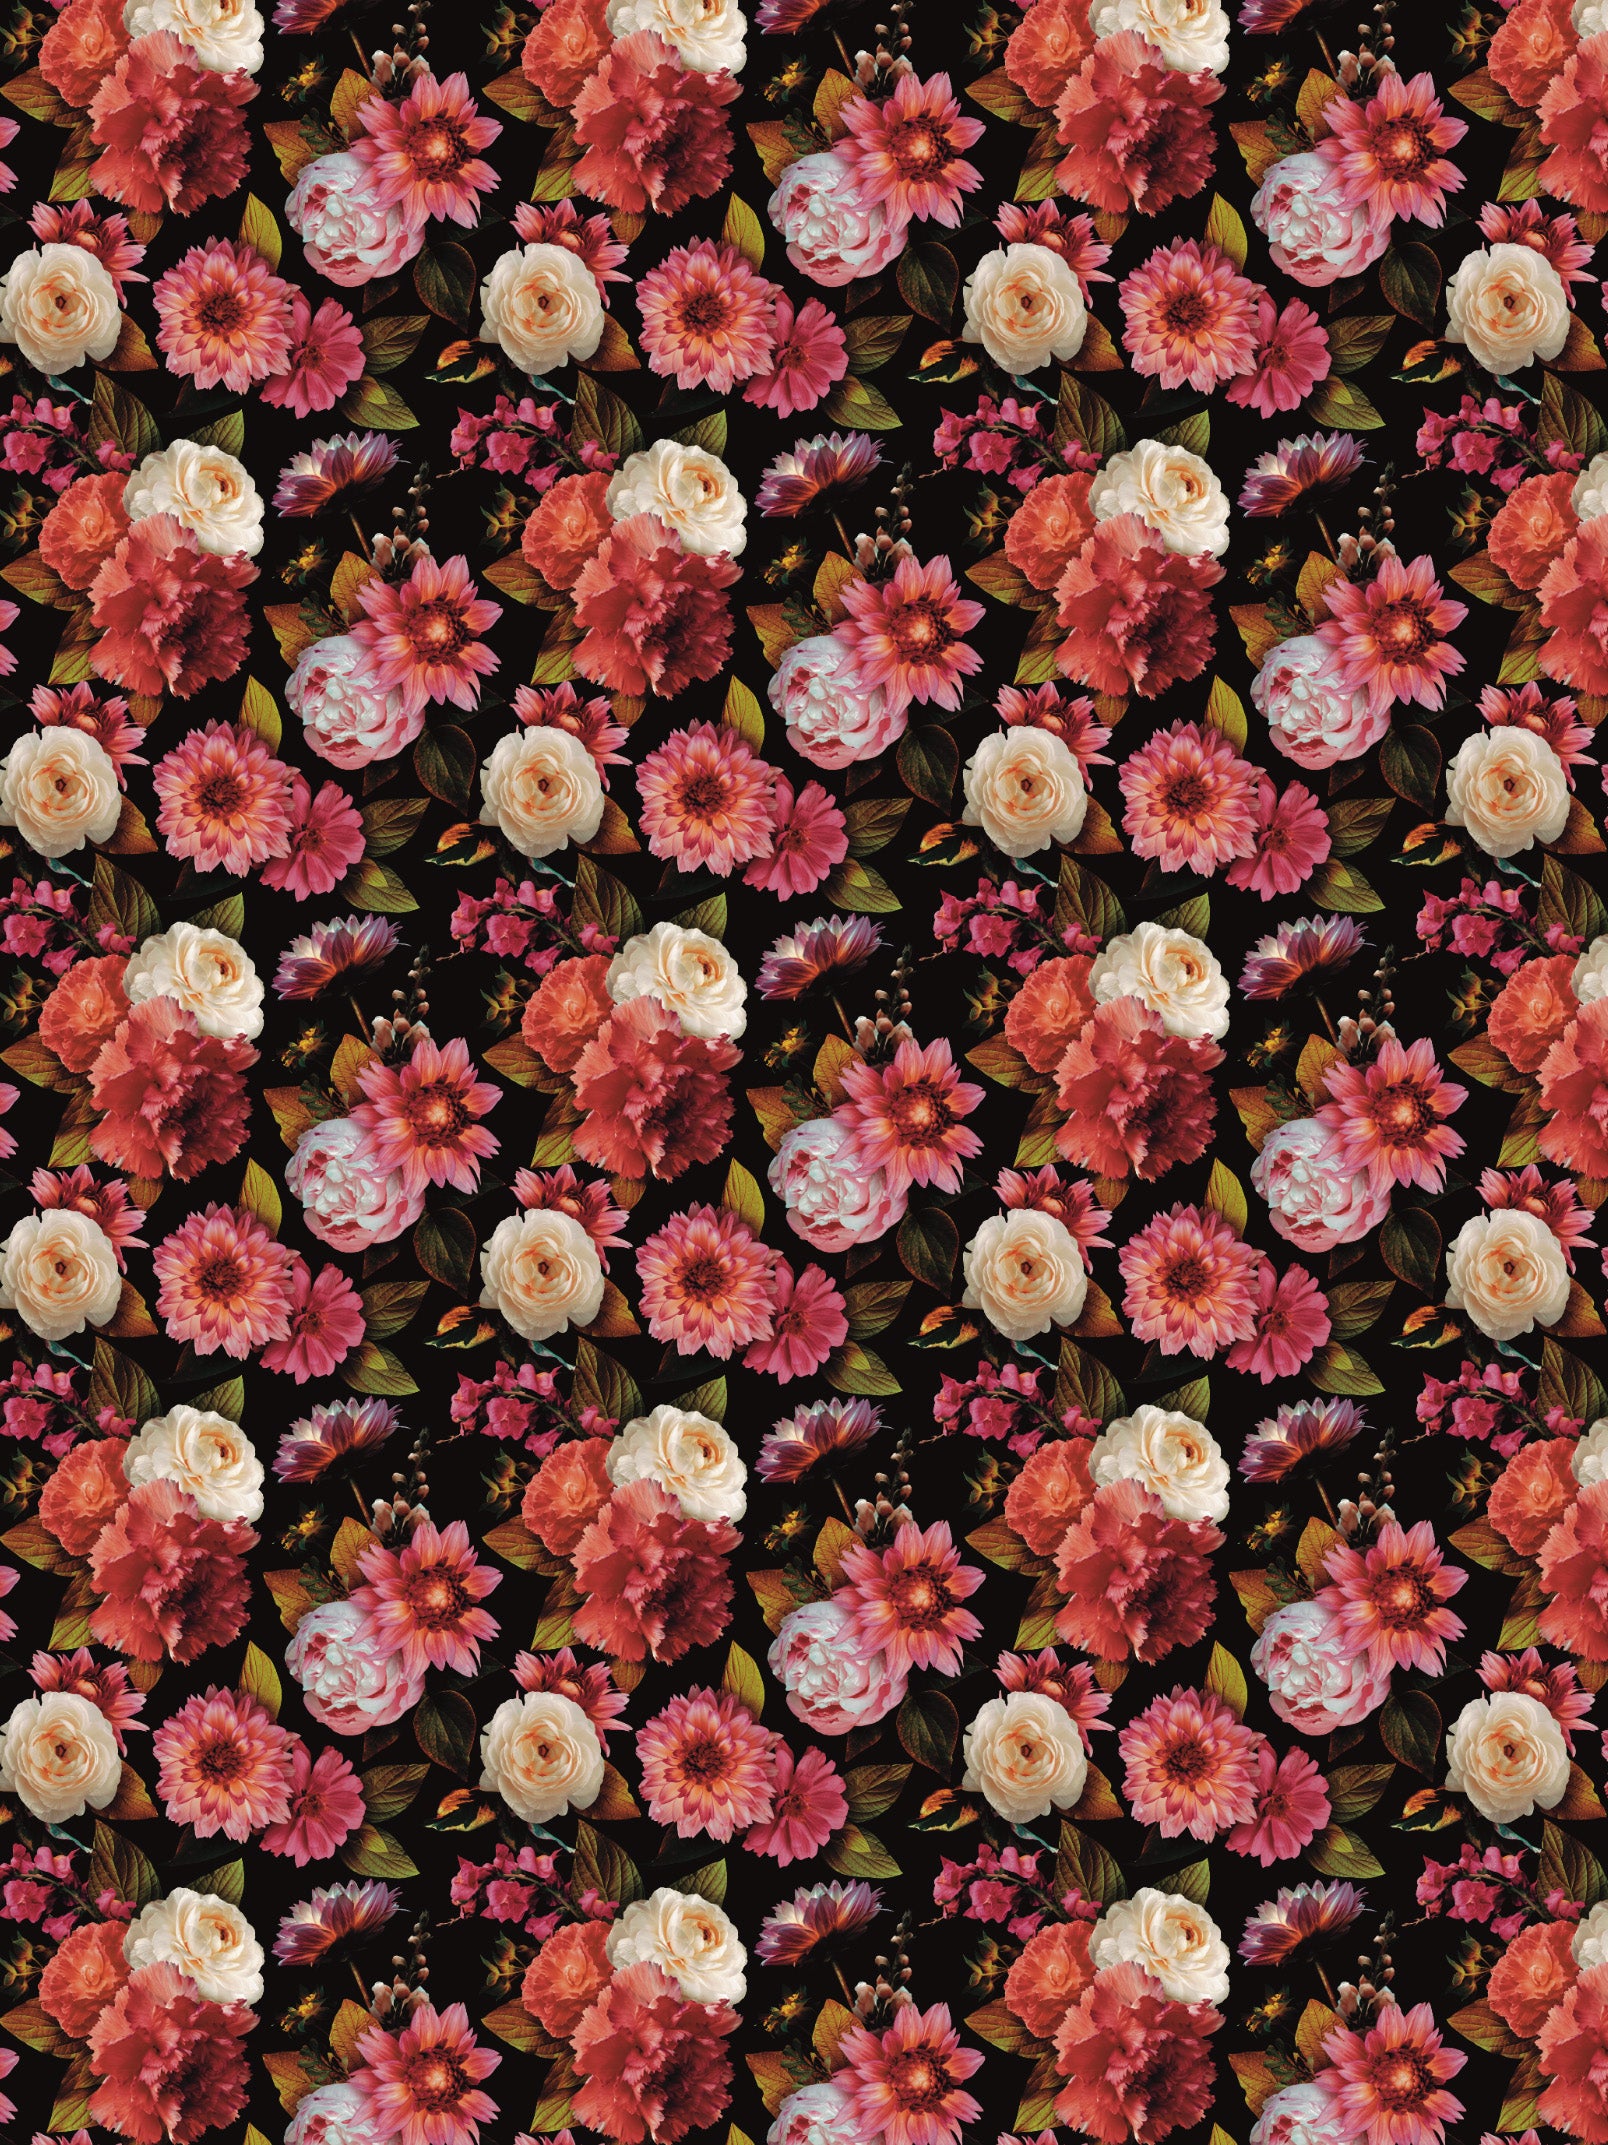 Image Transfers - RF6  Realistic Floral Pink & Salmon Textured Florals